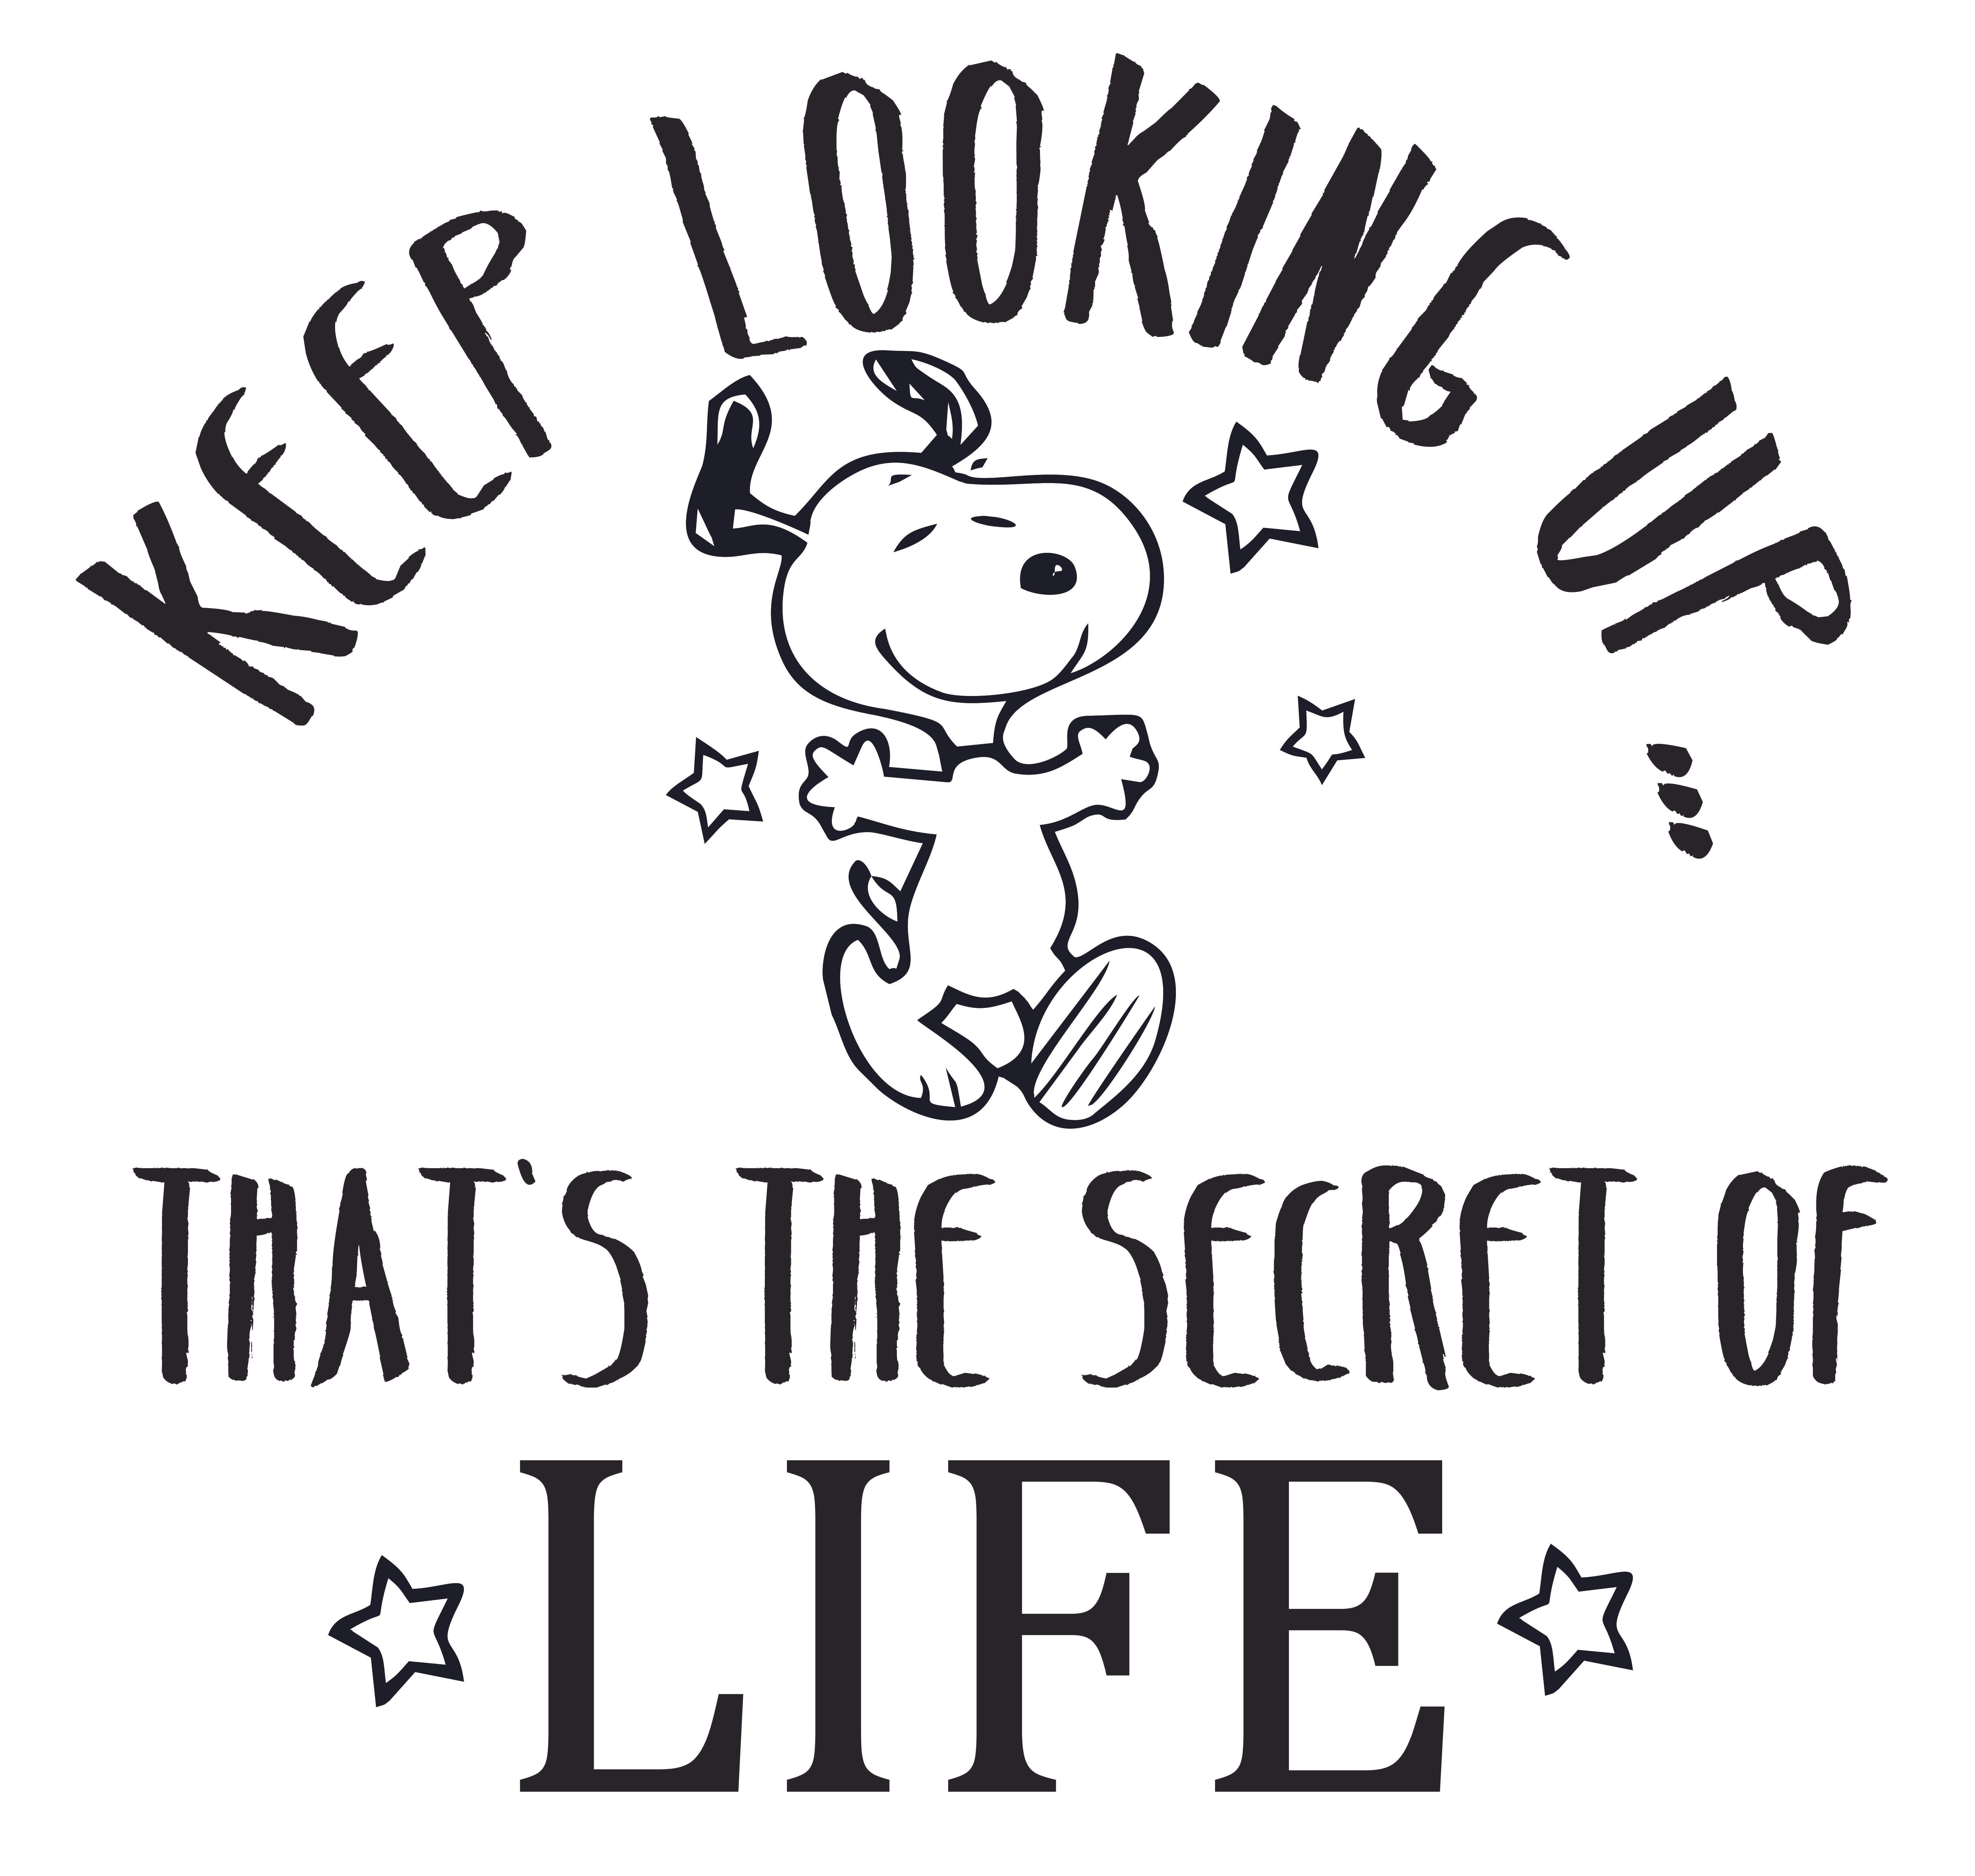 Adhesive Snoopy Wall Art Vinyl Decoration Quotes 19 X Diy Stick And Peel Inspirational Home Bedroom Living Room Decal Sticker Quotes Keep Looking Up That S The Secret Of Life